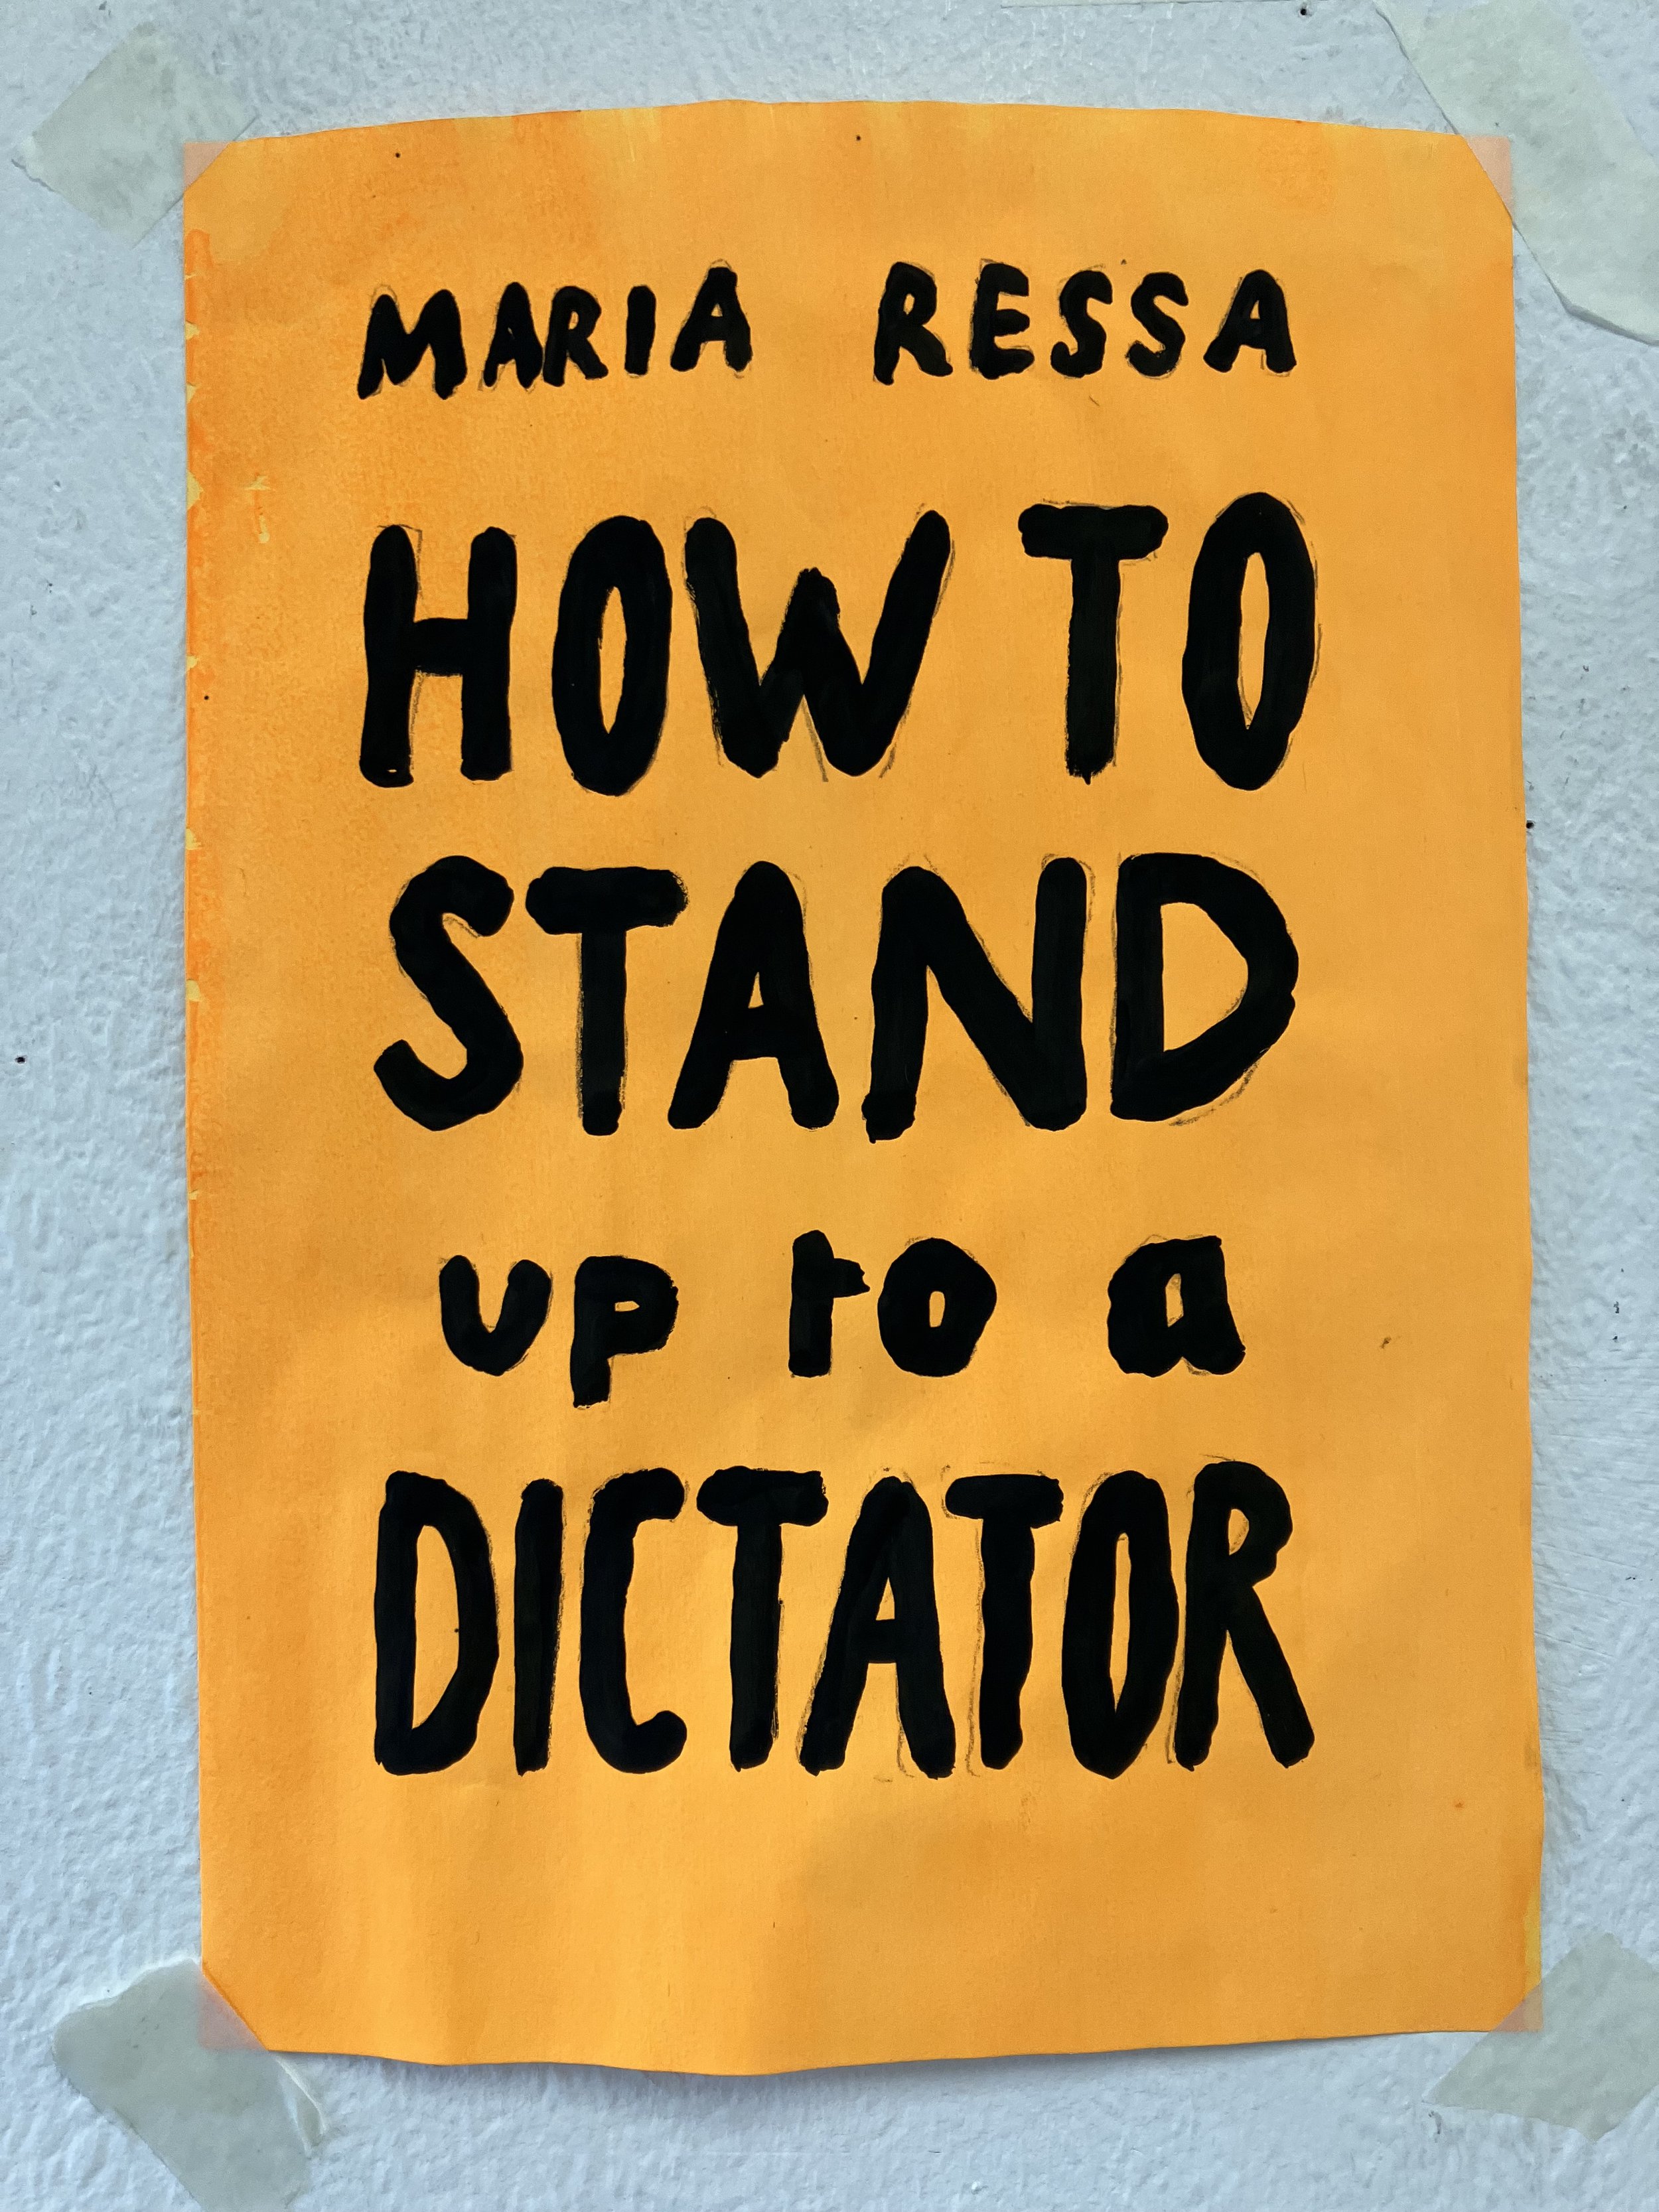 How to stand up to a dictator_D J Roberts.jpg